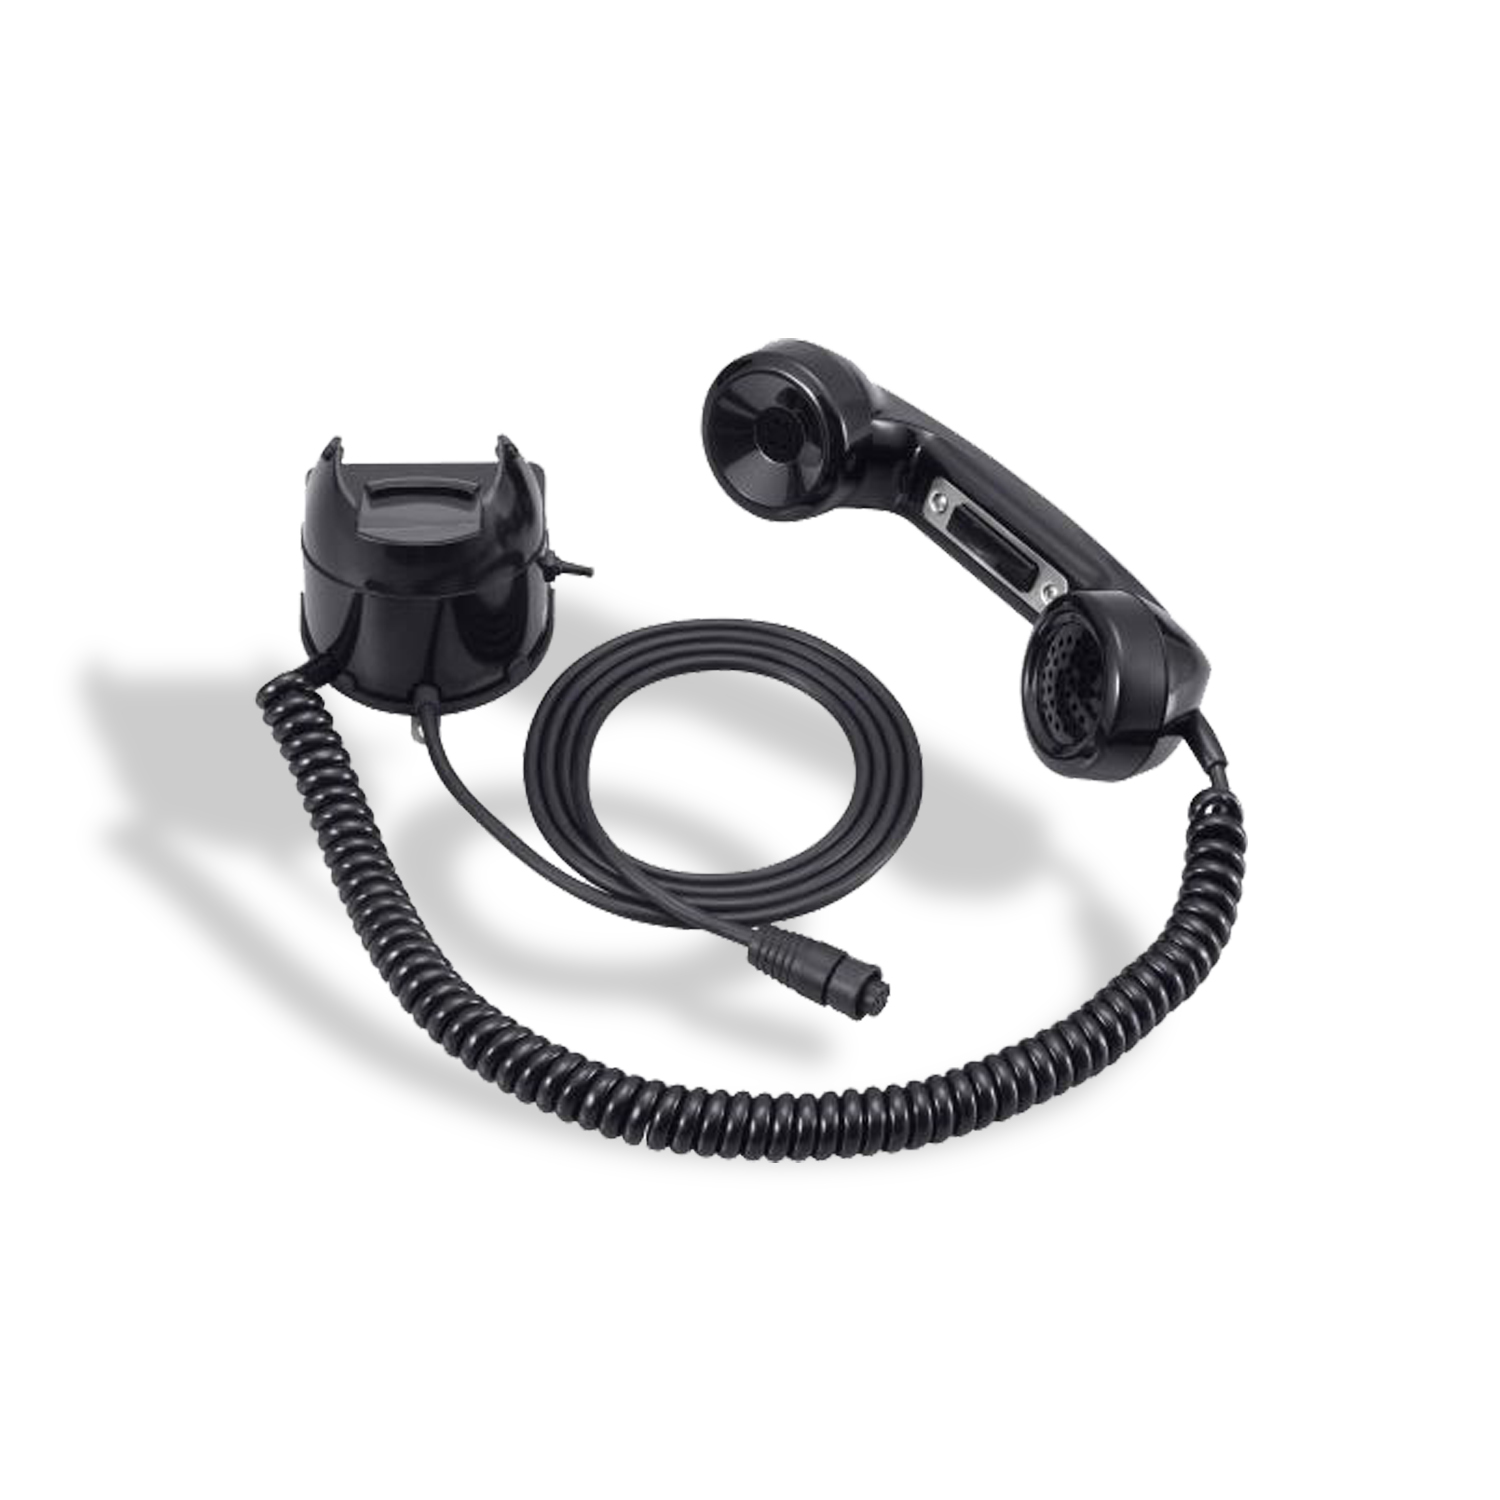 Headset in the form of a handset Icom HS-98